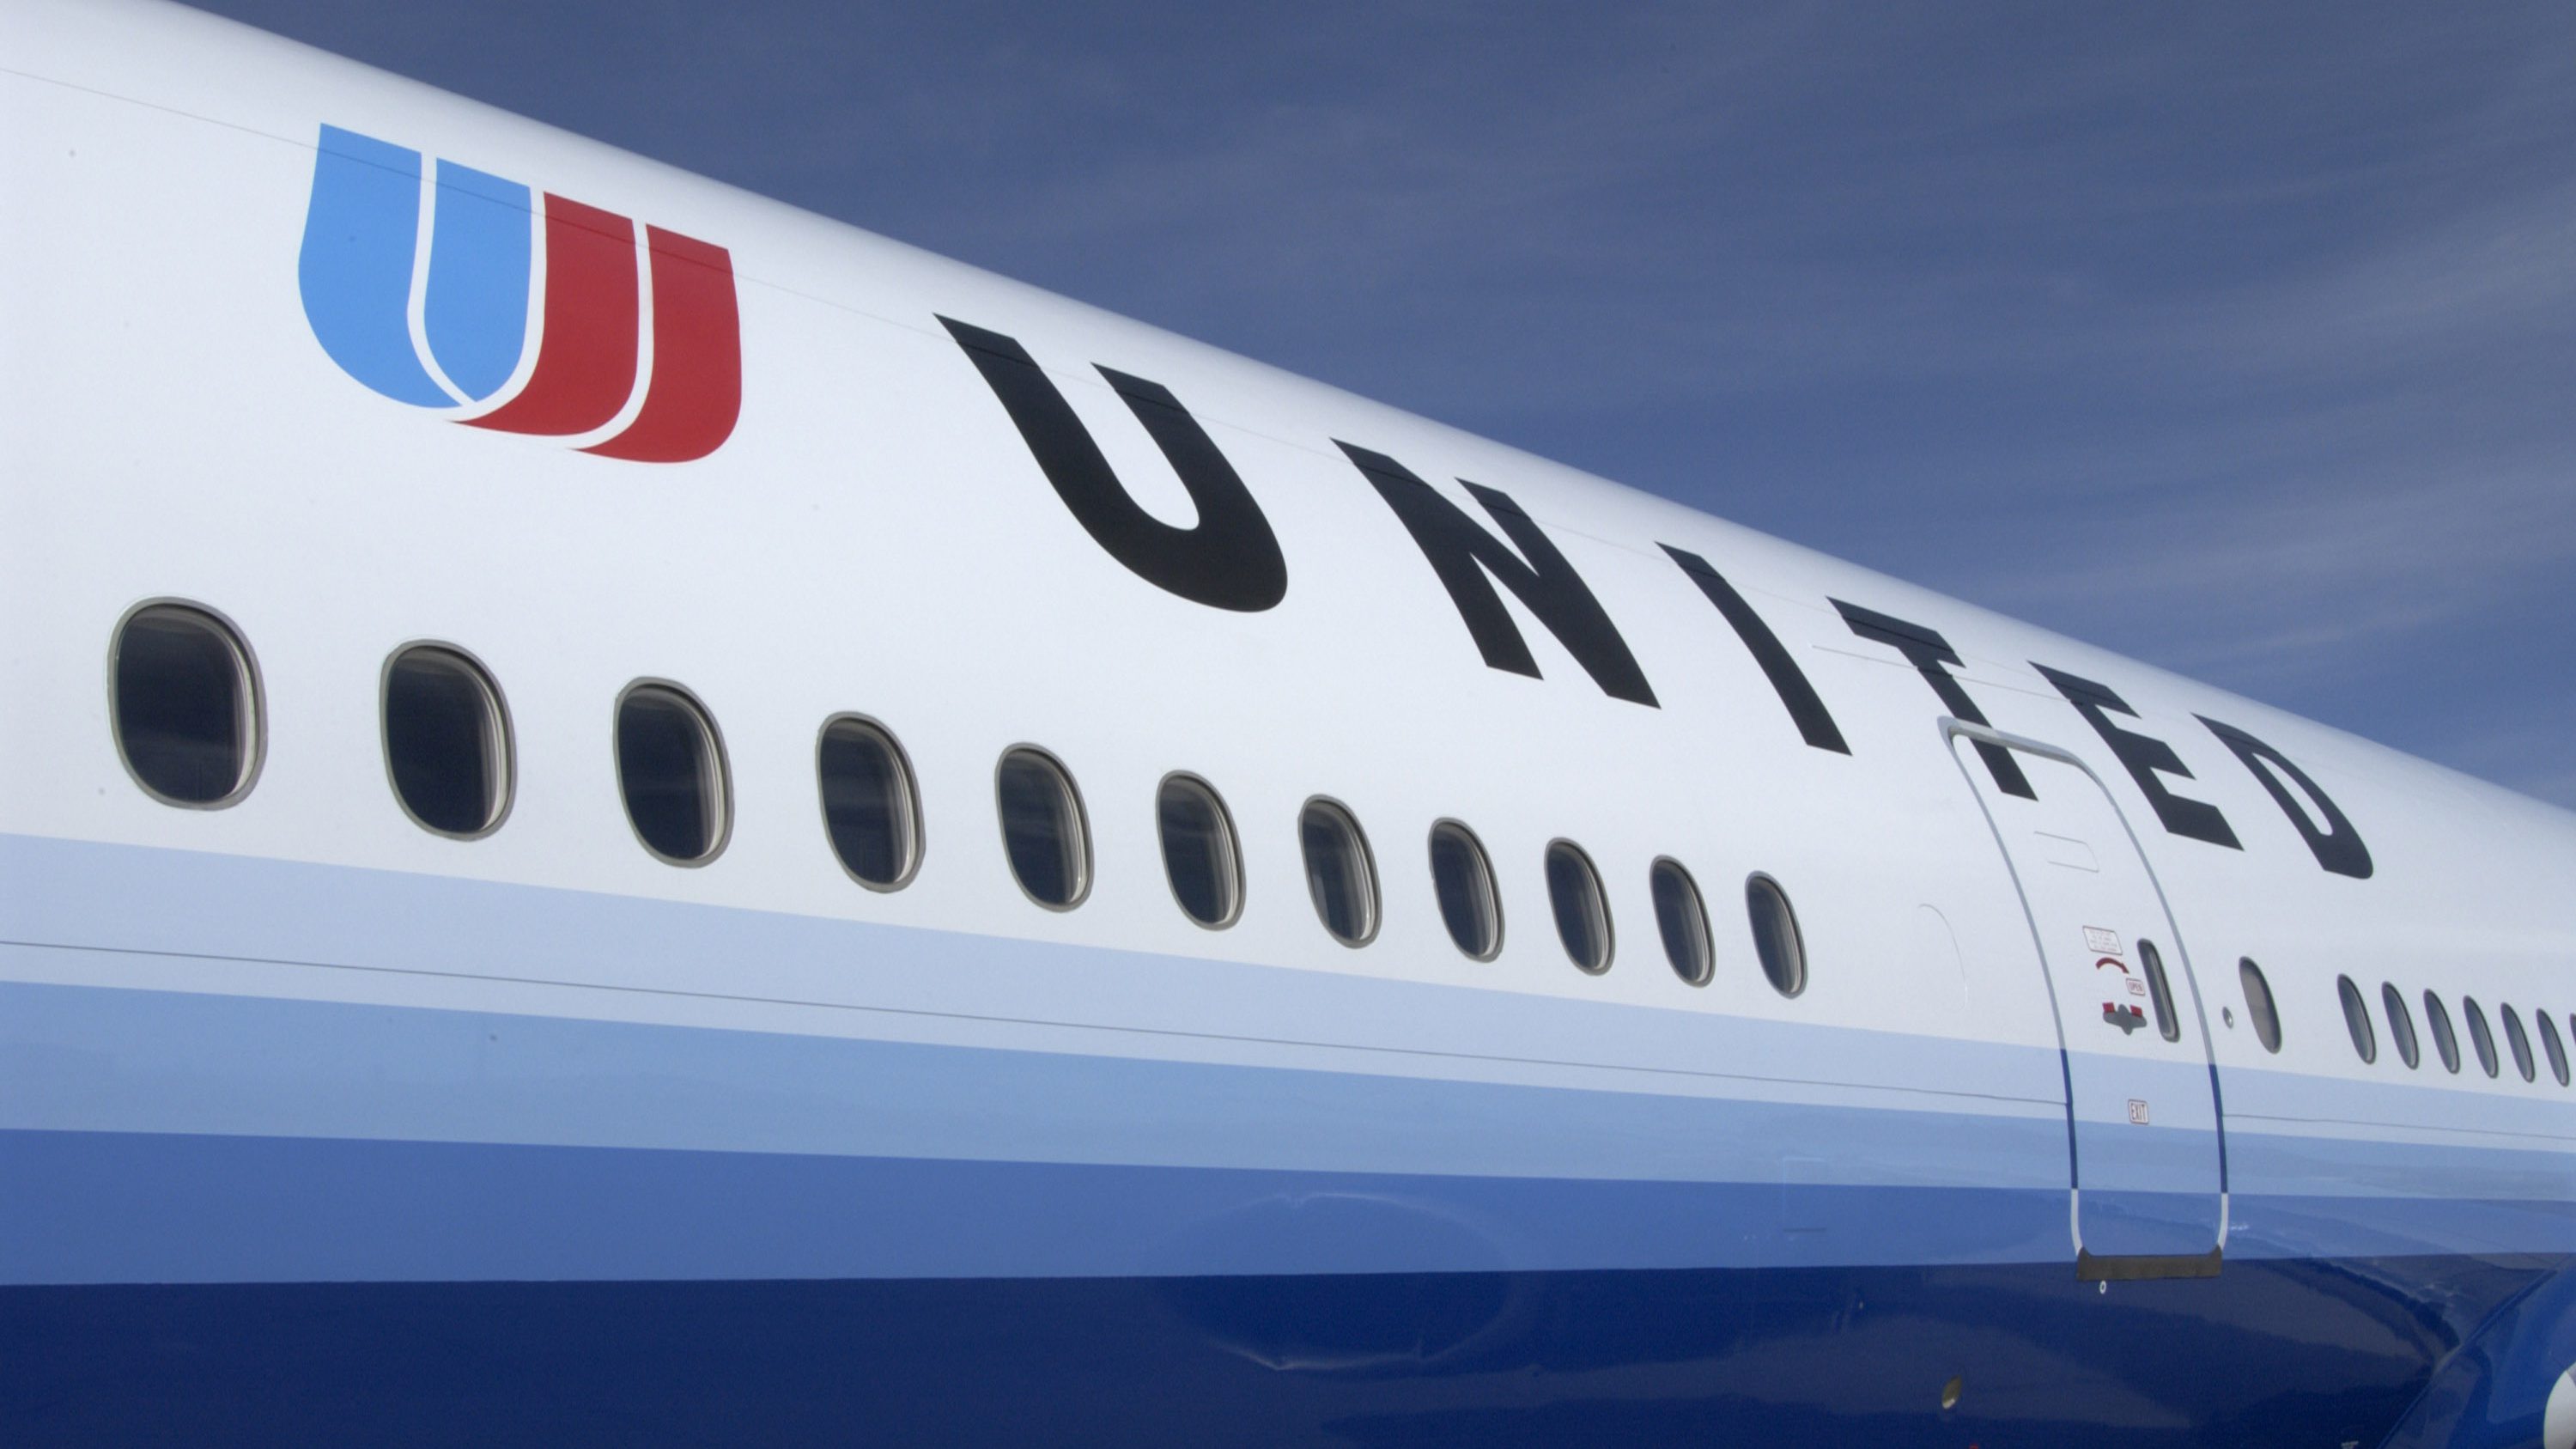 United Airlines Dress Code 5 Fast Facts You Need to Know